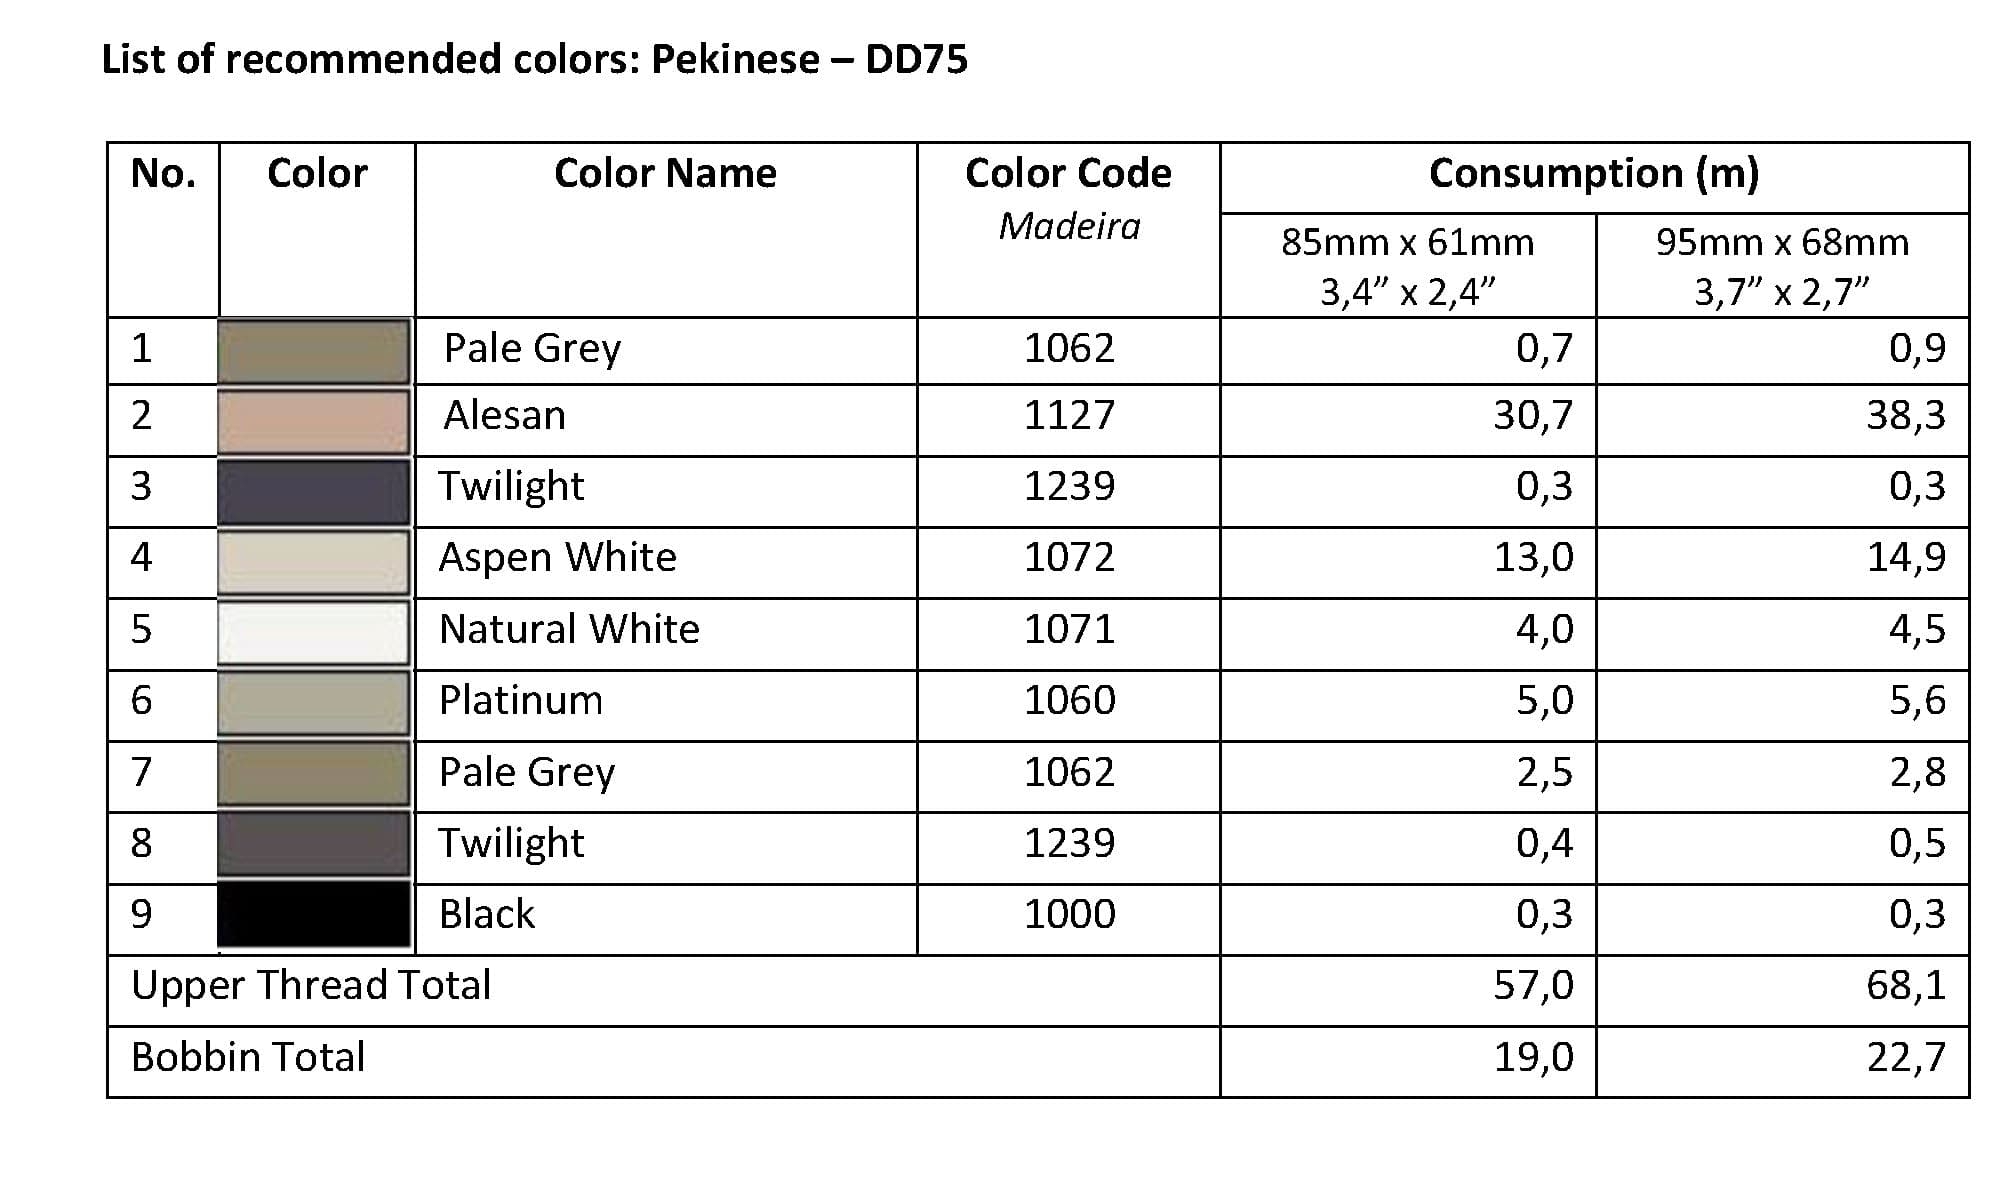 List of Recommended Colors -  Pekinese DD75